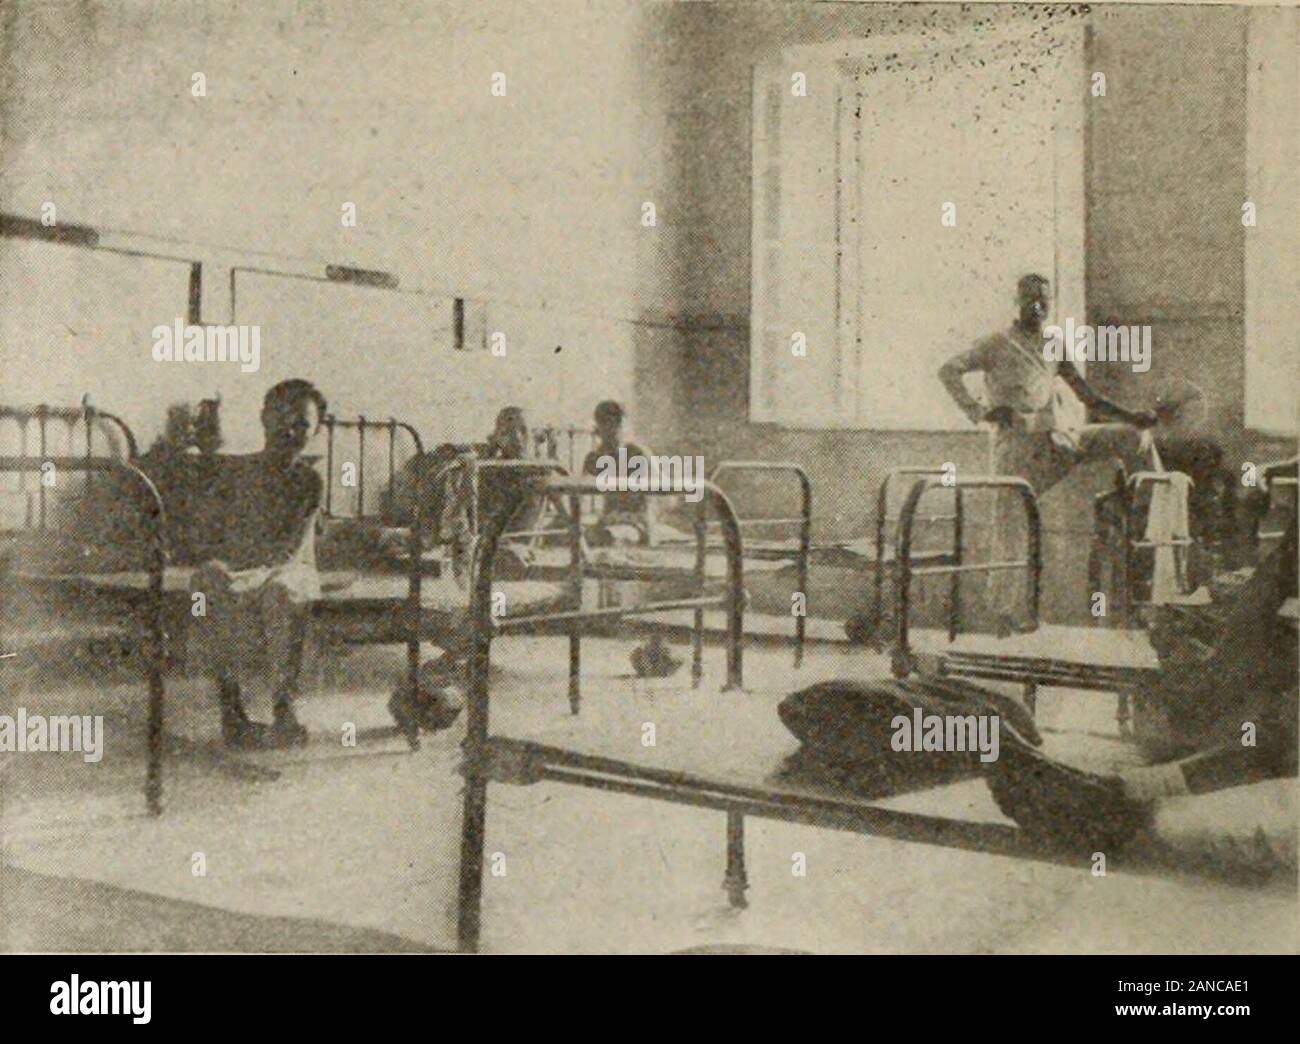 The Survey October 1916-March 1917 . &&*#* &&£- ? «x*? ^r *HK -, irHi. A MISSION HOSP TAL IX SOUTH CHINA The bedding looks sanitary, if not comfortable Many distinguished women doctors have also taken theirdegrees abroad, such as Drs. Hu Kim Eng, Foochow; IdaKahn, Nanchang; Mary Stone, Kiukiang; Li Yuen Tsao,Nanking, and Amy Wong, Shanghai. Owing to the close proximity of Japan to China, and tocheaper educational facilities in that country, quite a numberof Chinese graduates have returned from Japan and are hold-ing important posts under the government. For instance, Dr.Fang Chin, chief of the Stock Photo